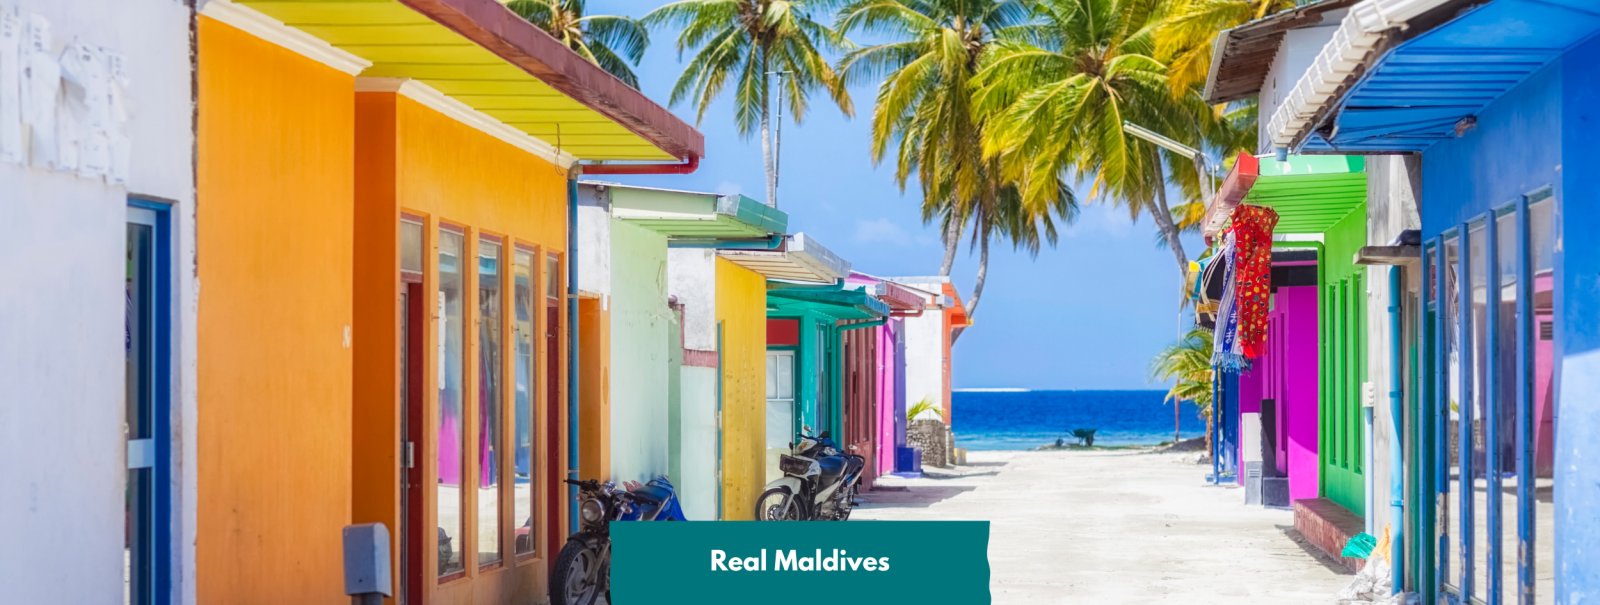 Experience the Real Maldives